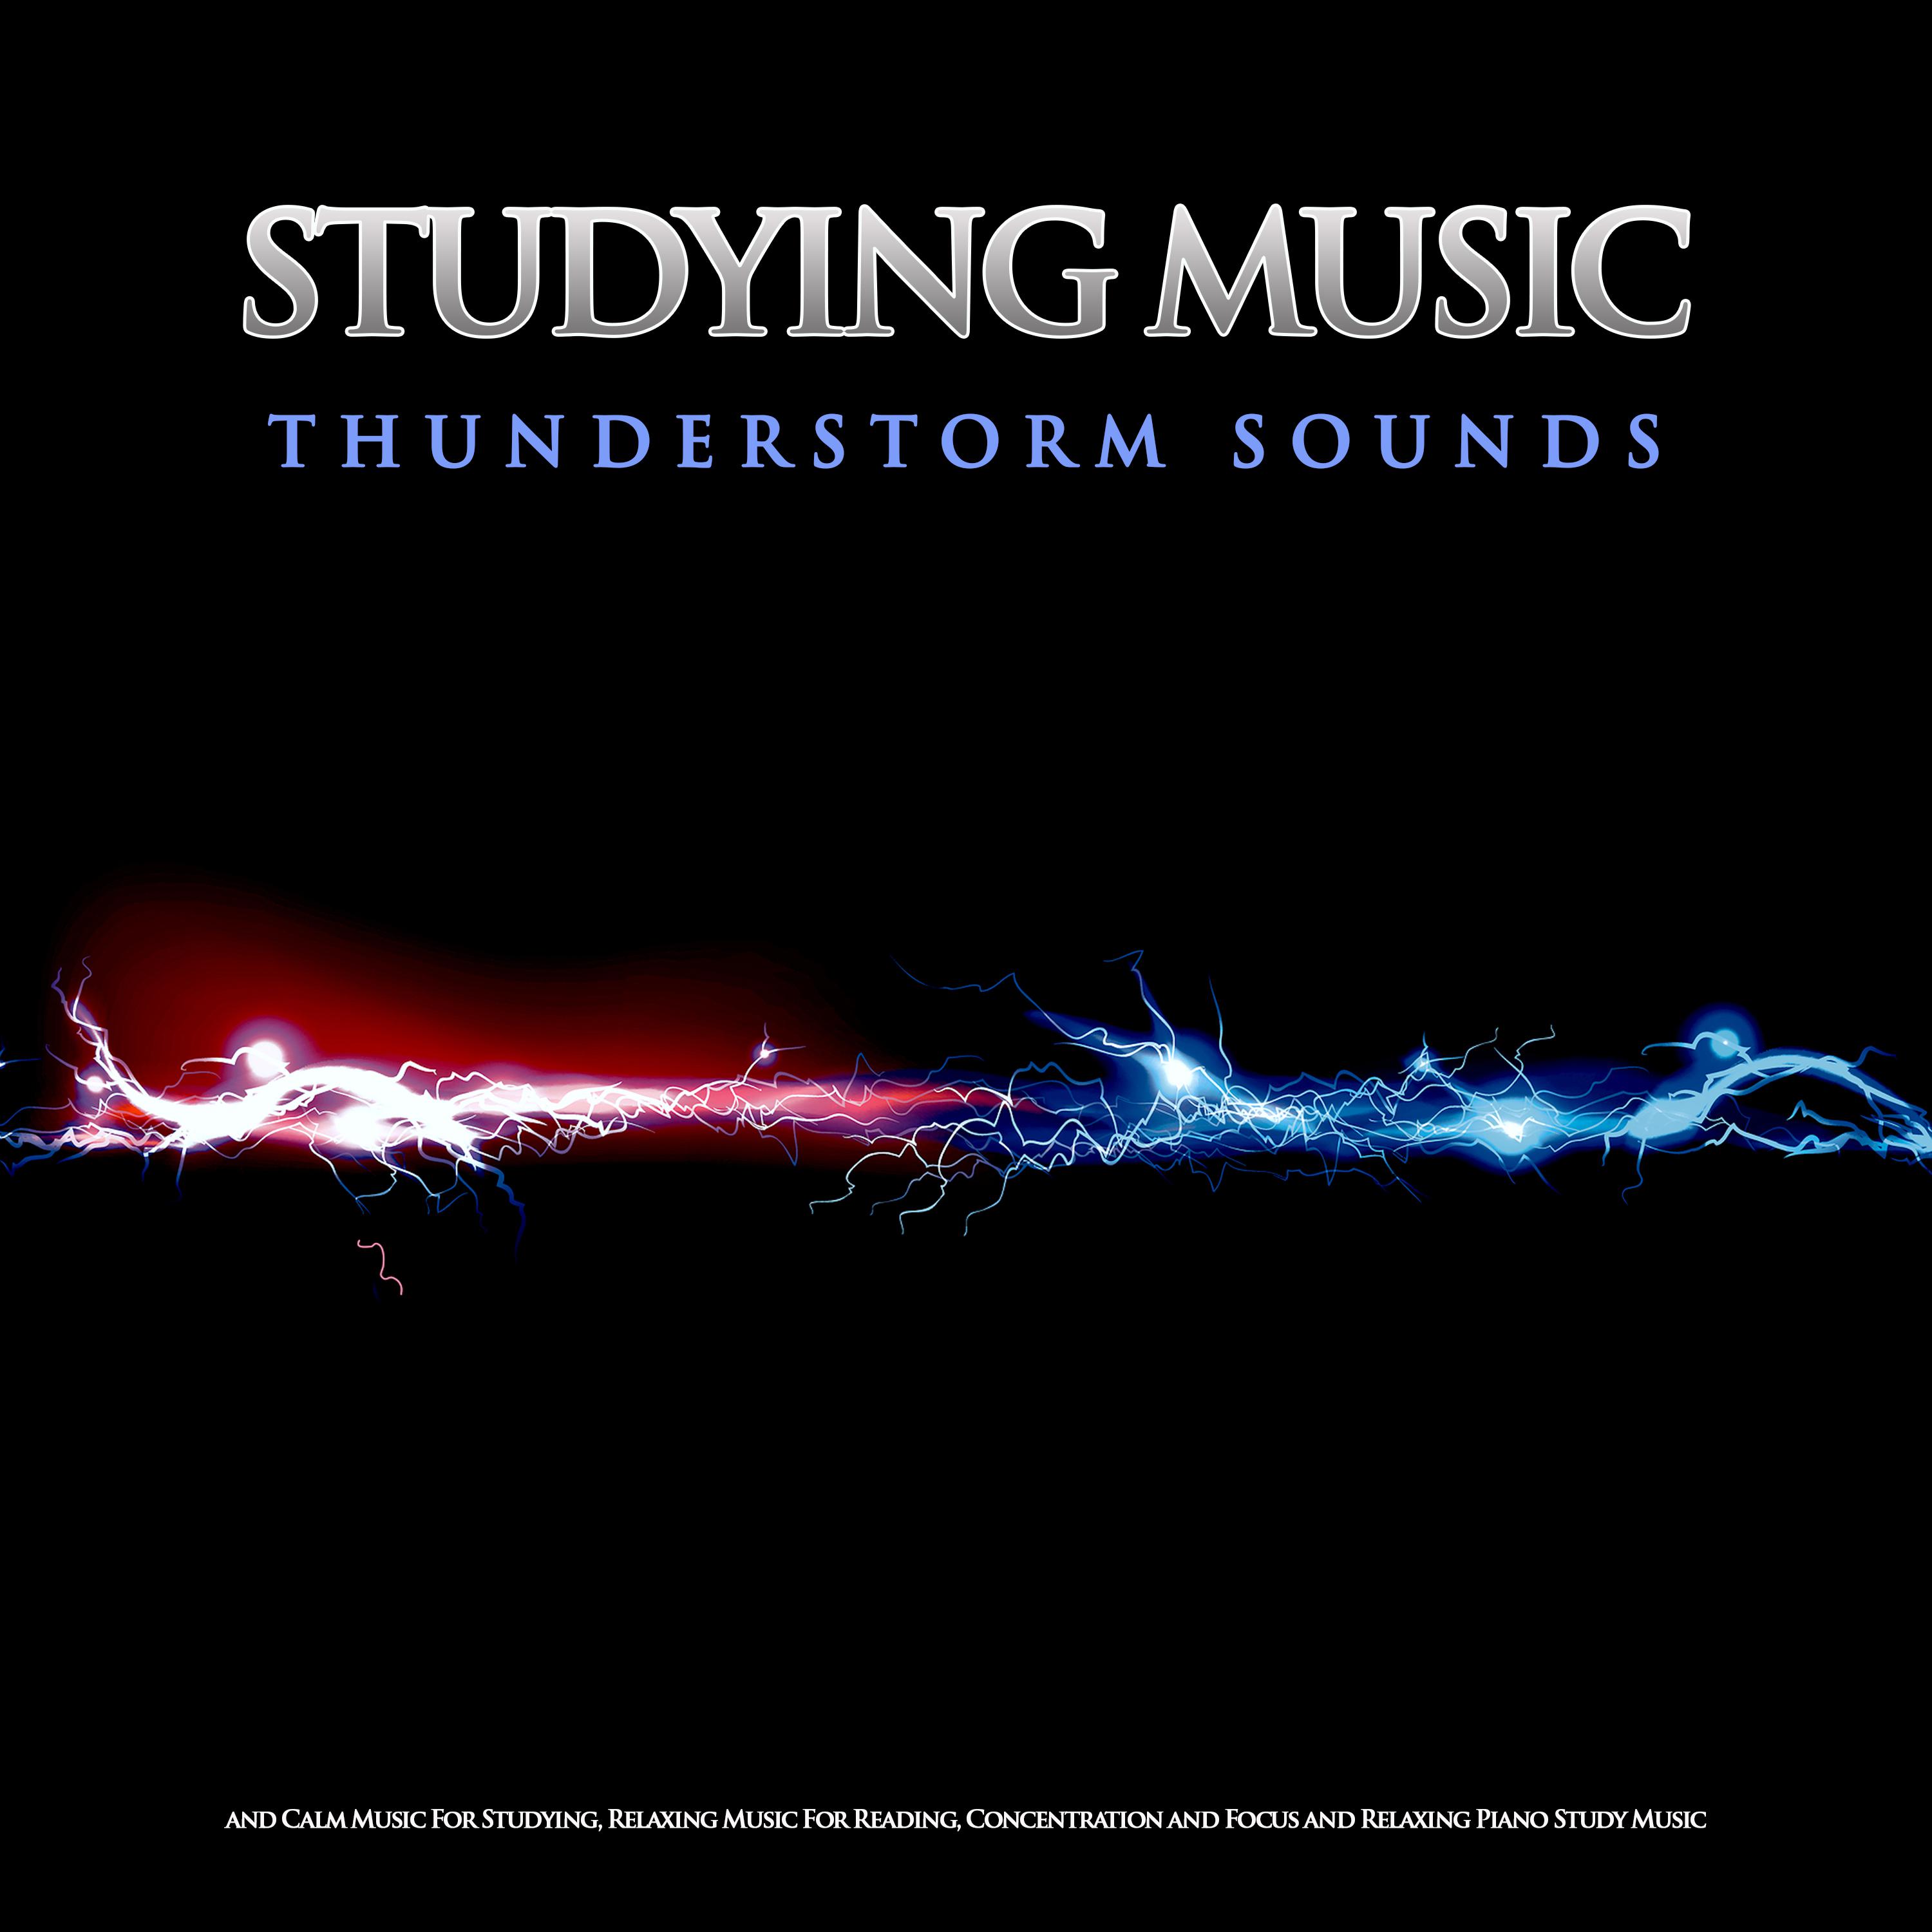 Ambient Music With Thunderstorm Sounds For Studying